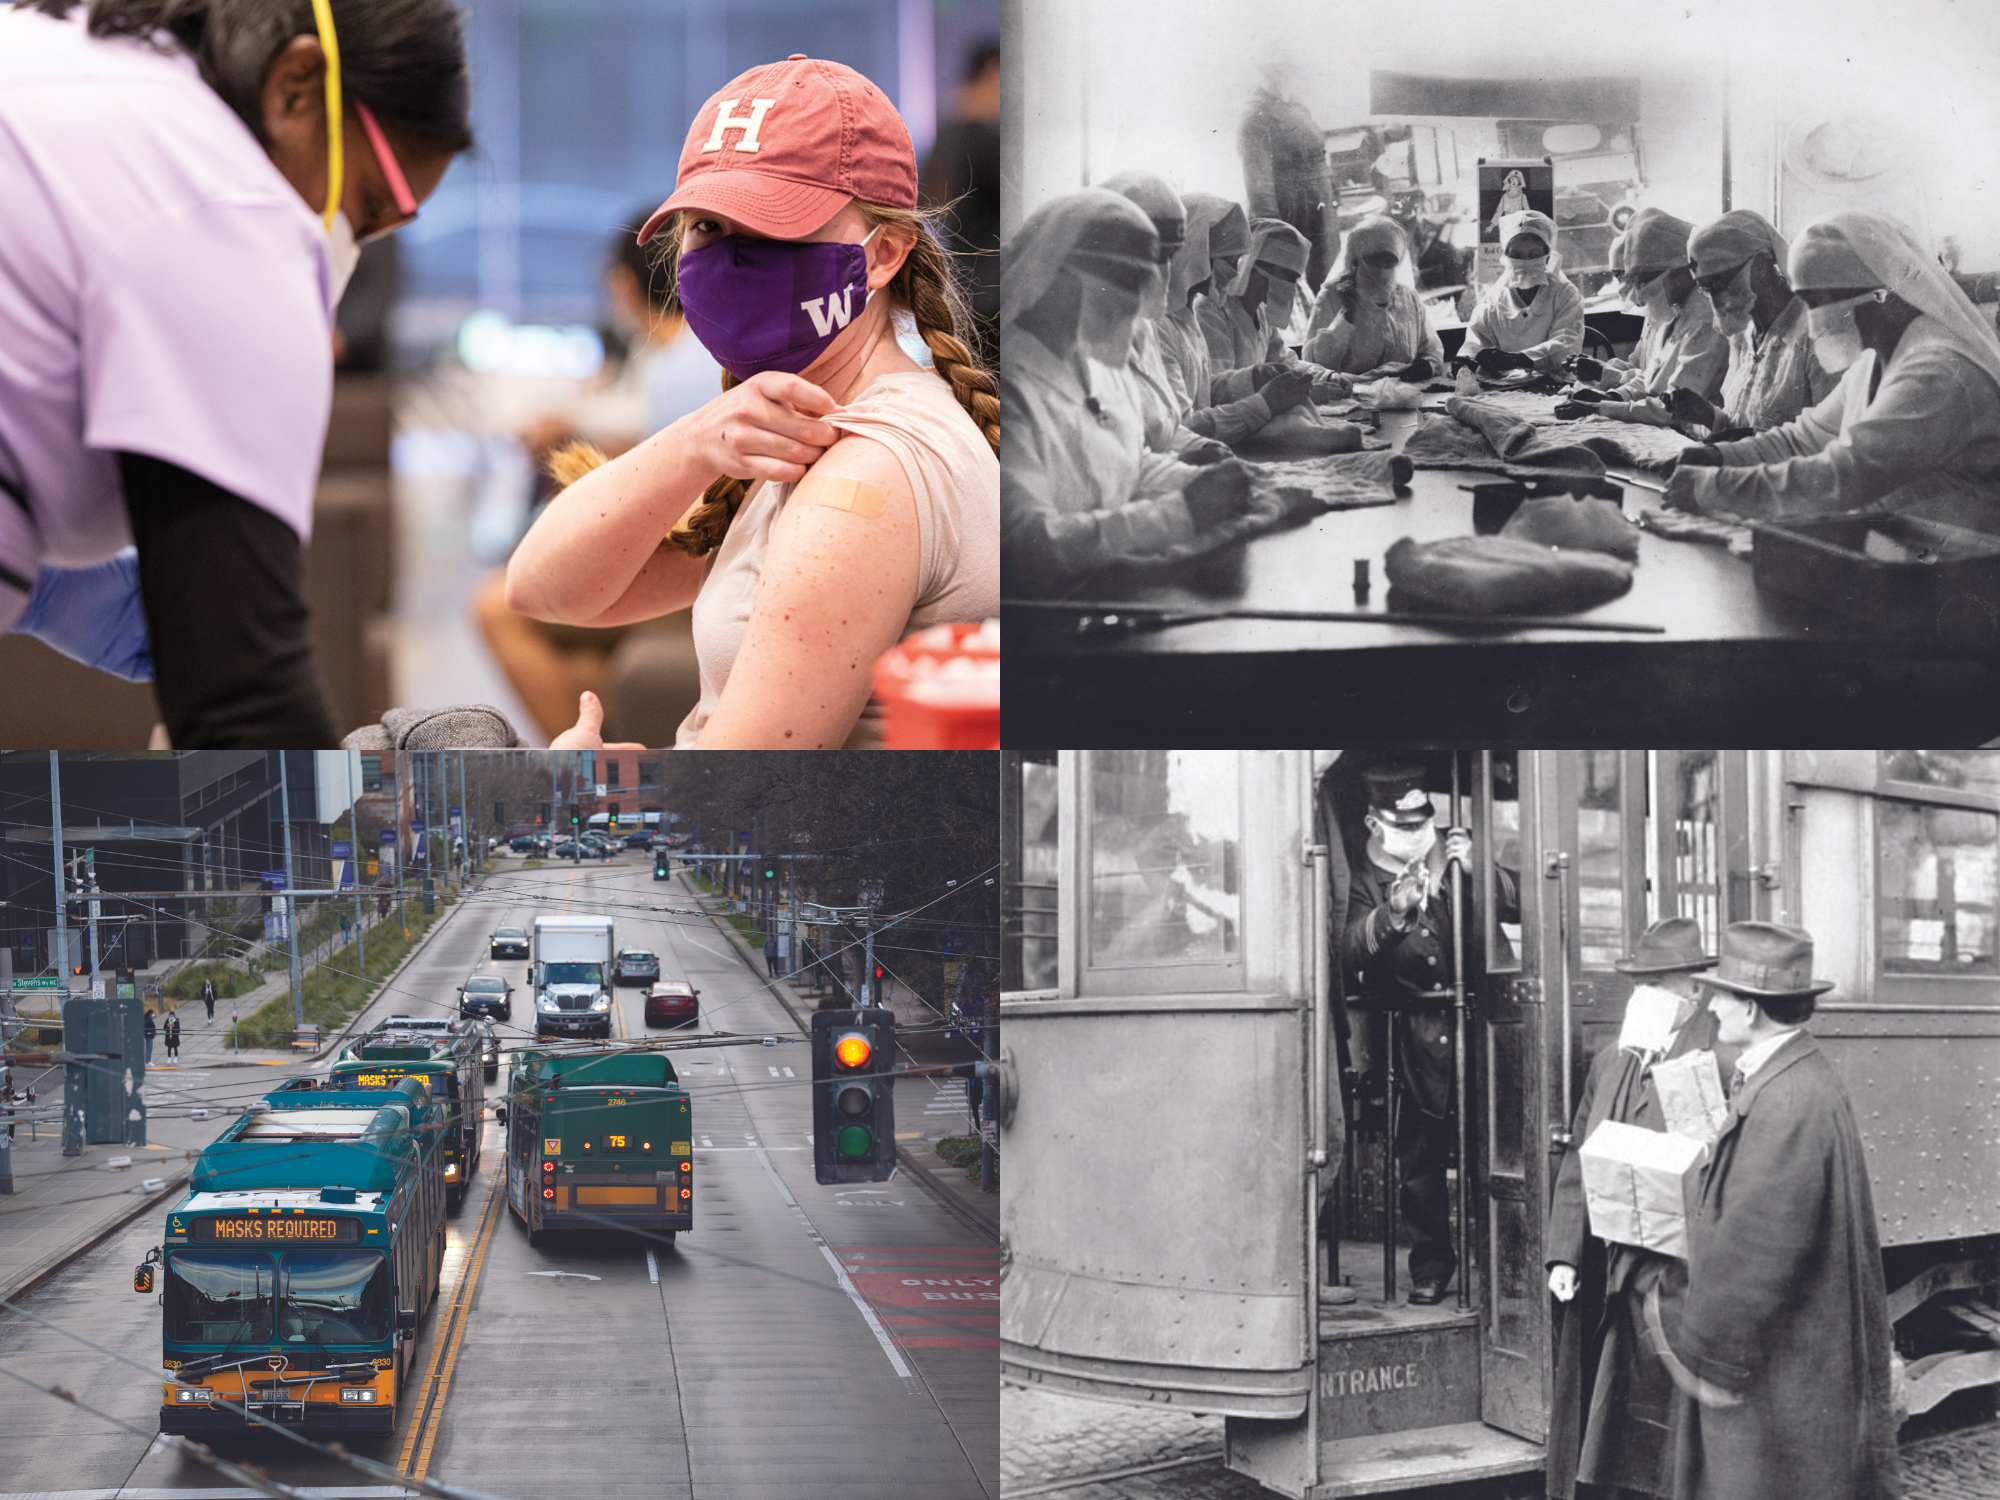 A collage of images shows a young woman receiving a vaccine and a line of buses in modern times, plus researchers and bus riders in 1918.